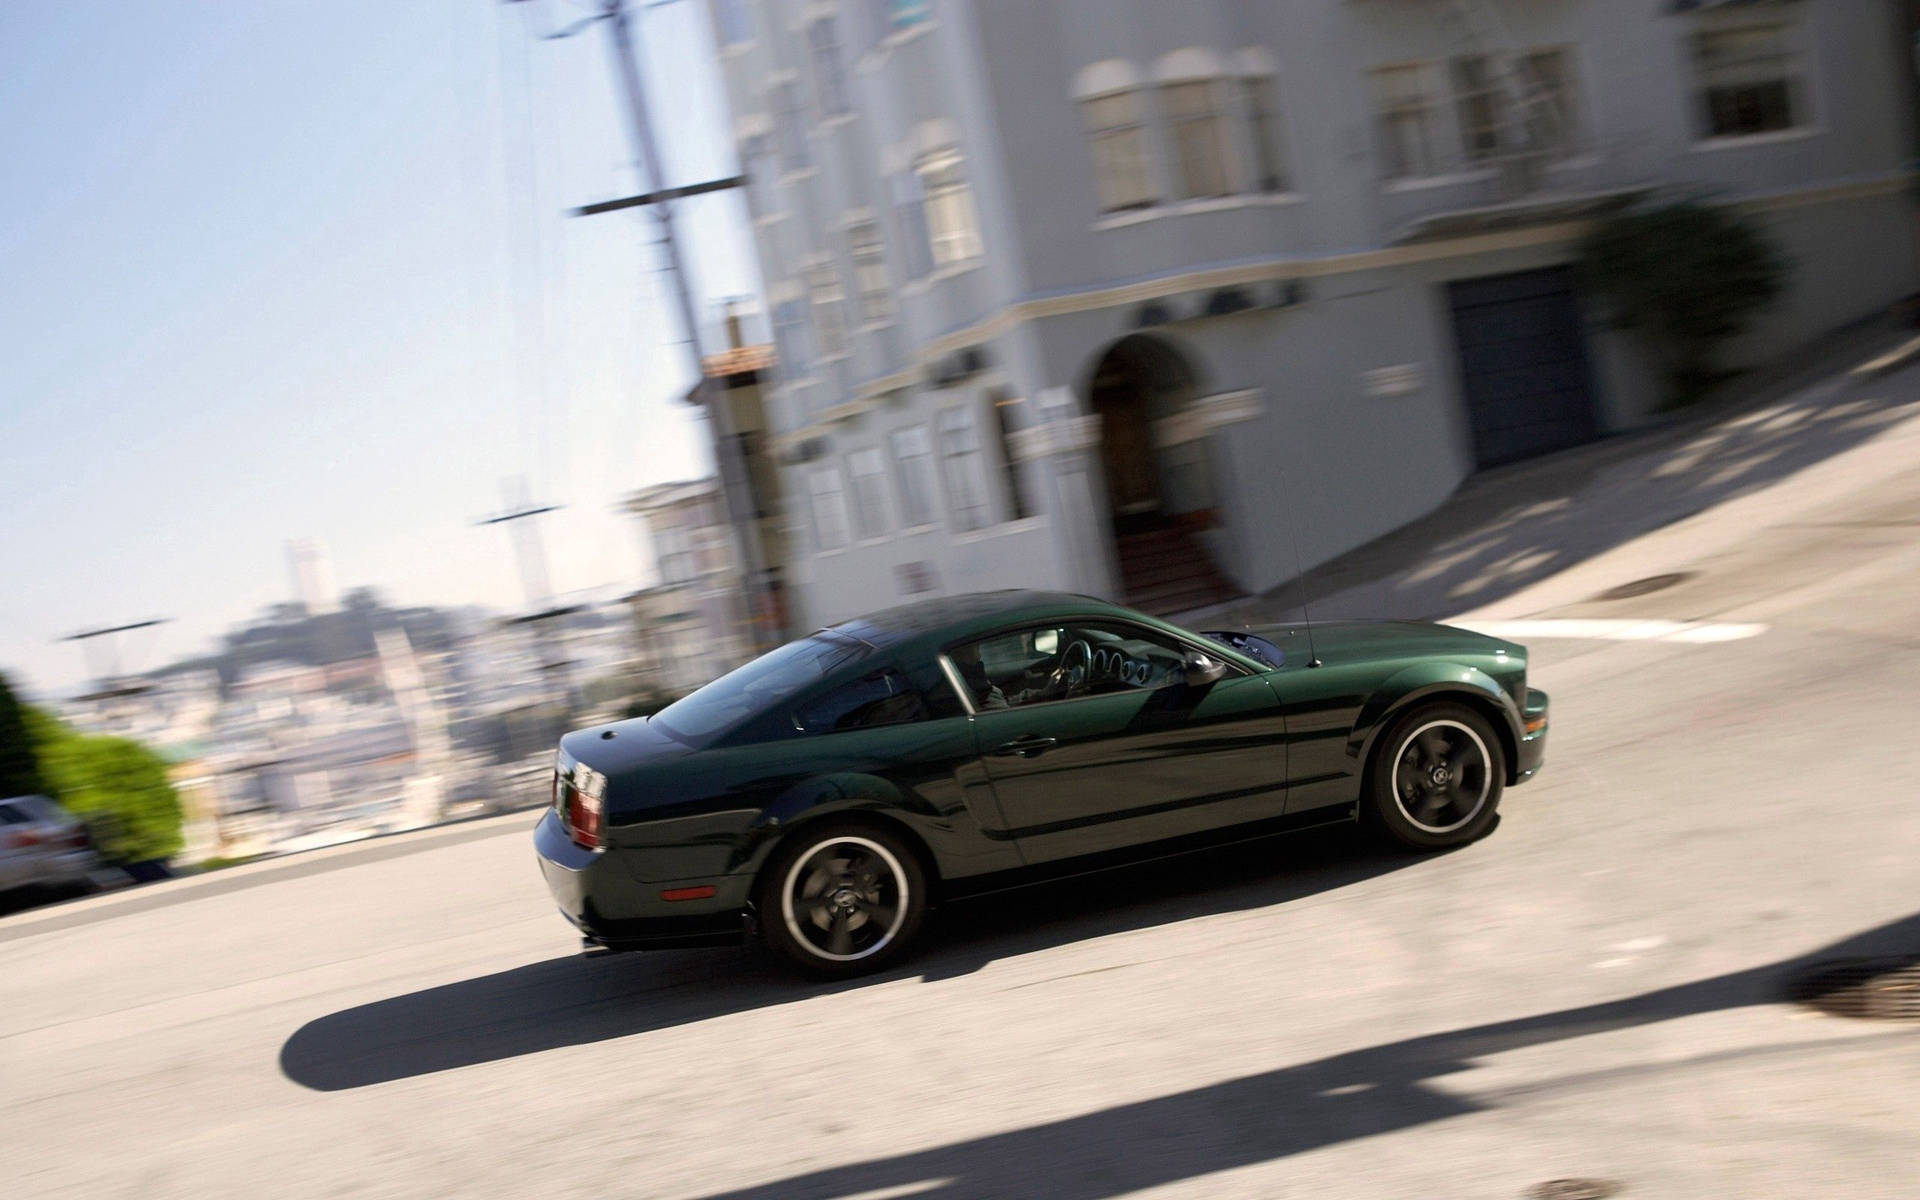 Army Green Ford Mustang Background